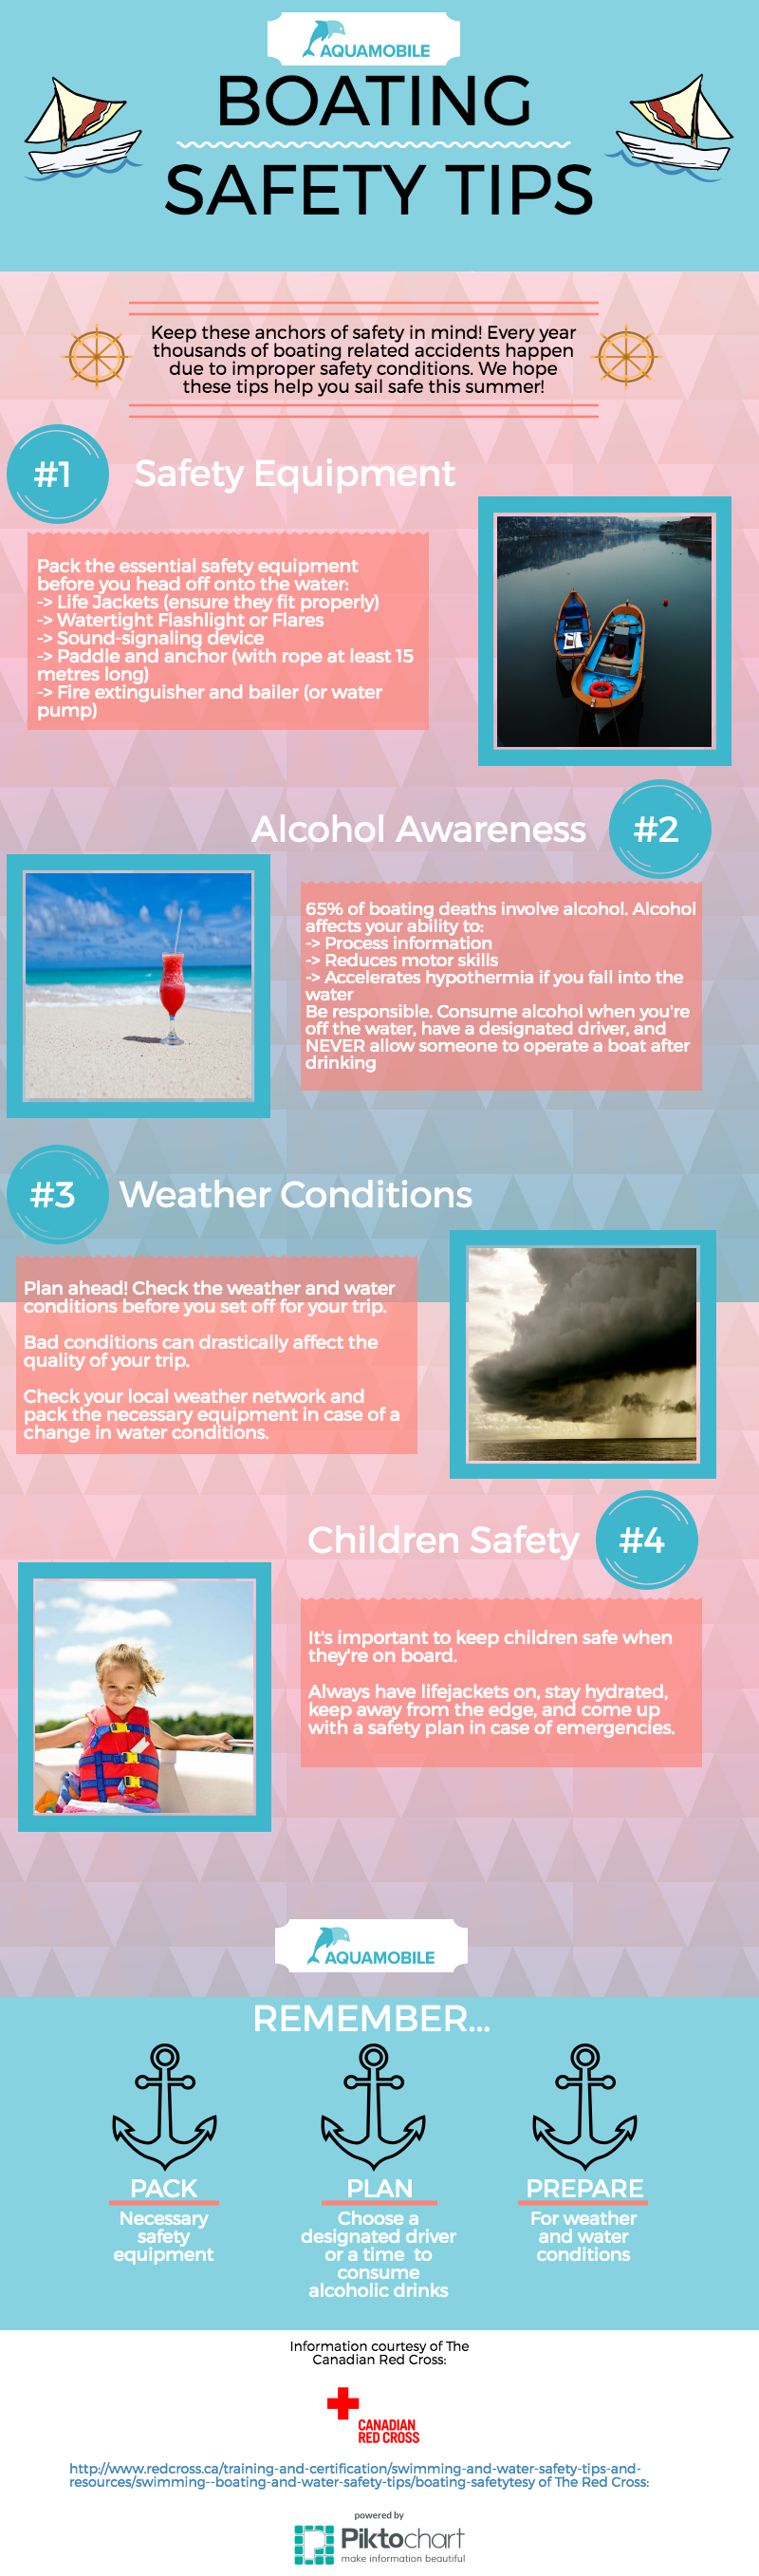 boating safety. boat safety, boating safety tips, water safety tips, infographic